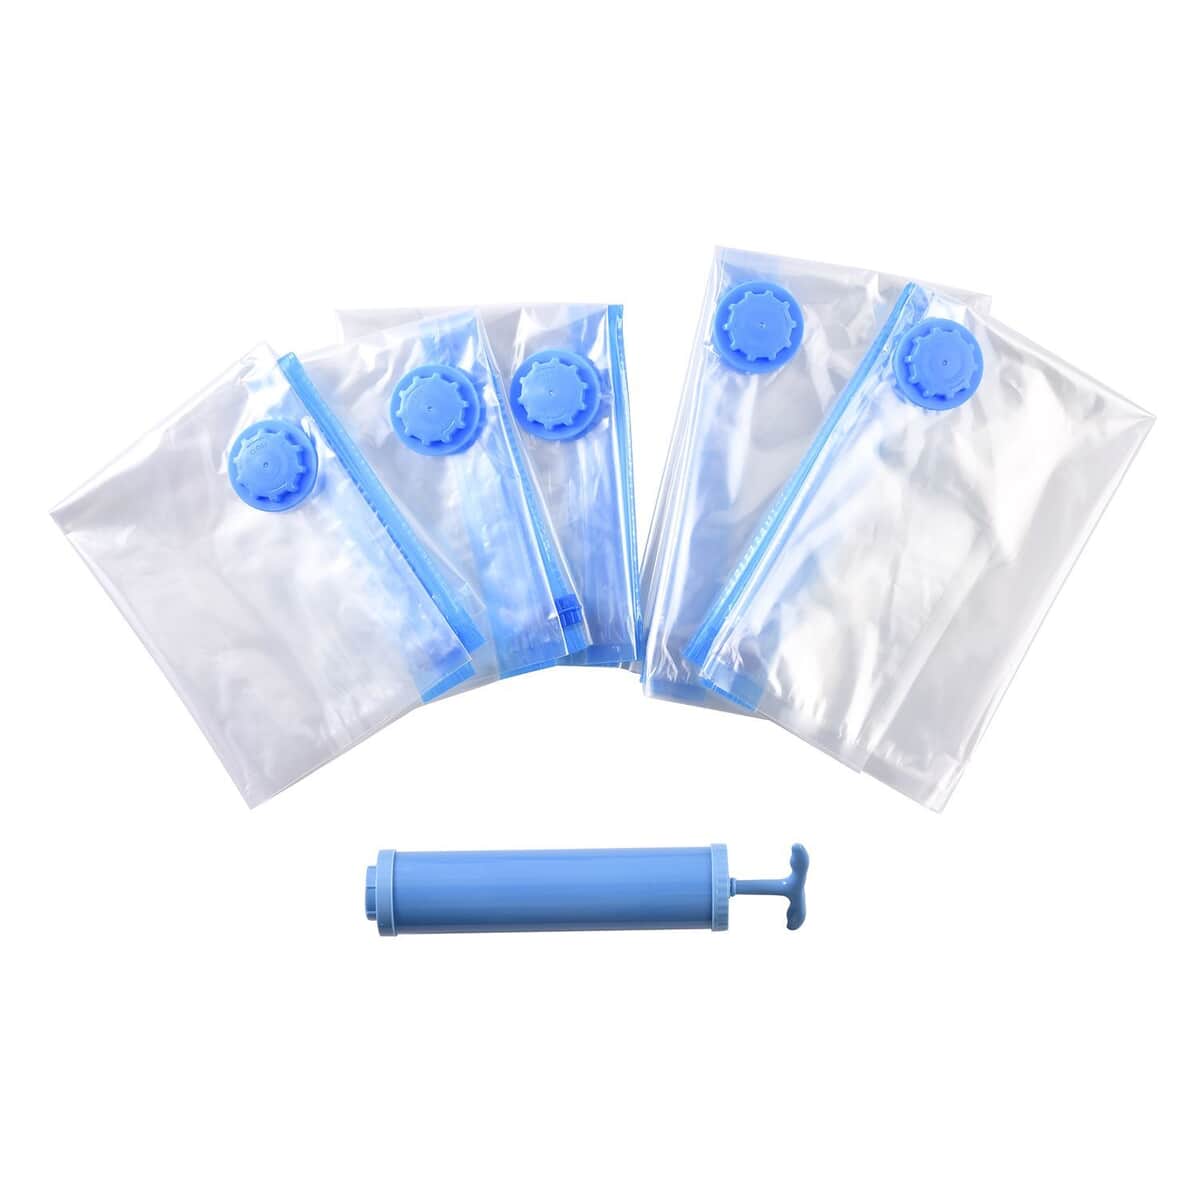 Buy Vacuum Compression Storage Bags with Hand Pump - 5 Packs in 2 Sizes ...